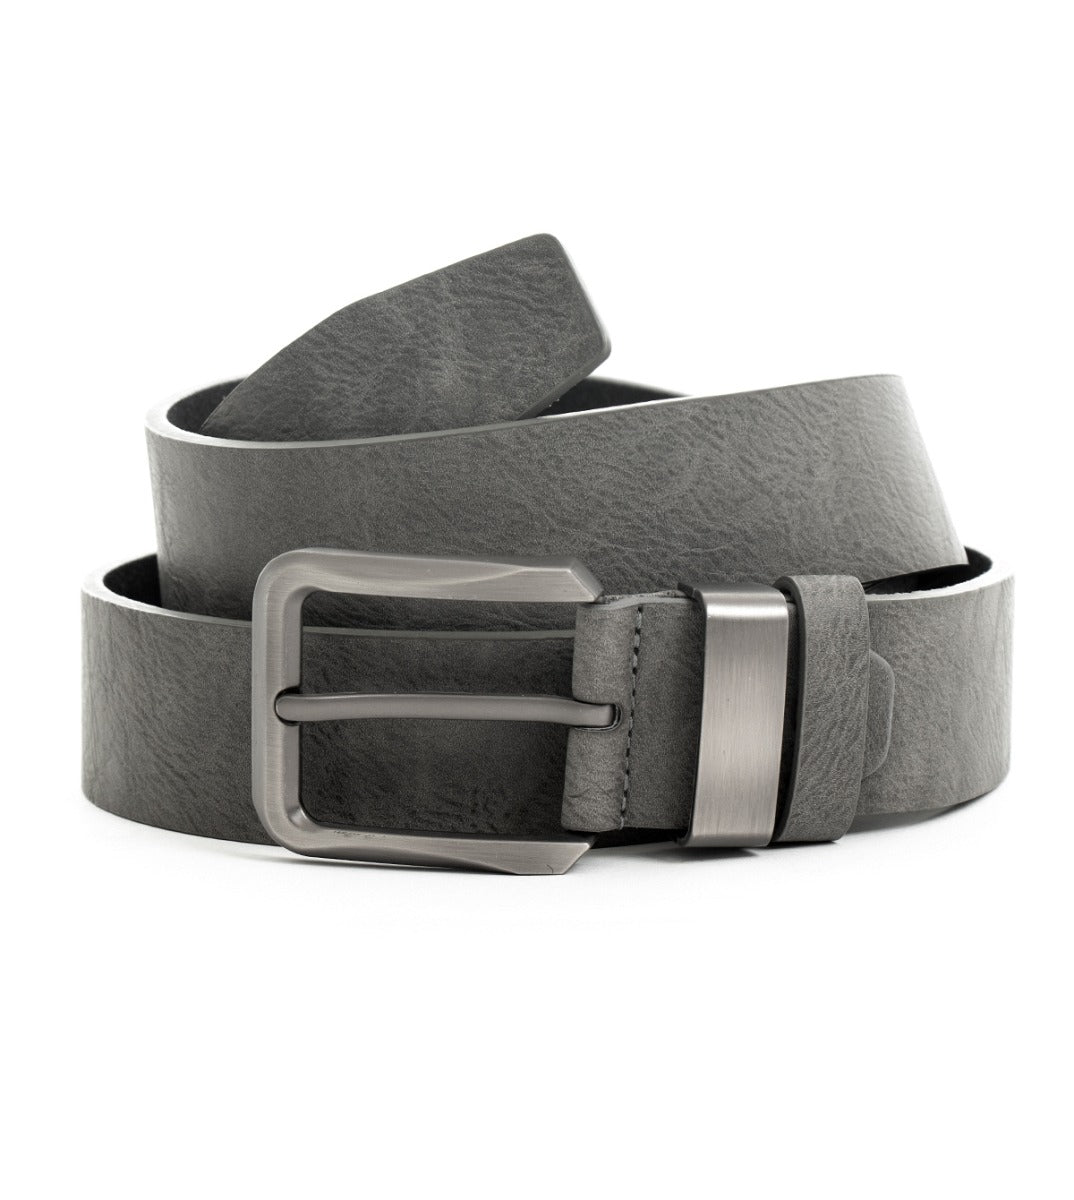 Men's Belt with Adjustable Metal Buckle Gray Textured Faux Leather GIOSAL-A2065A